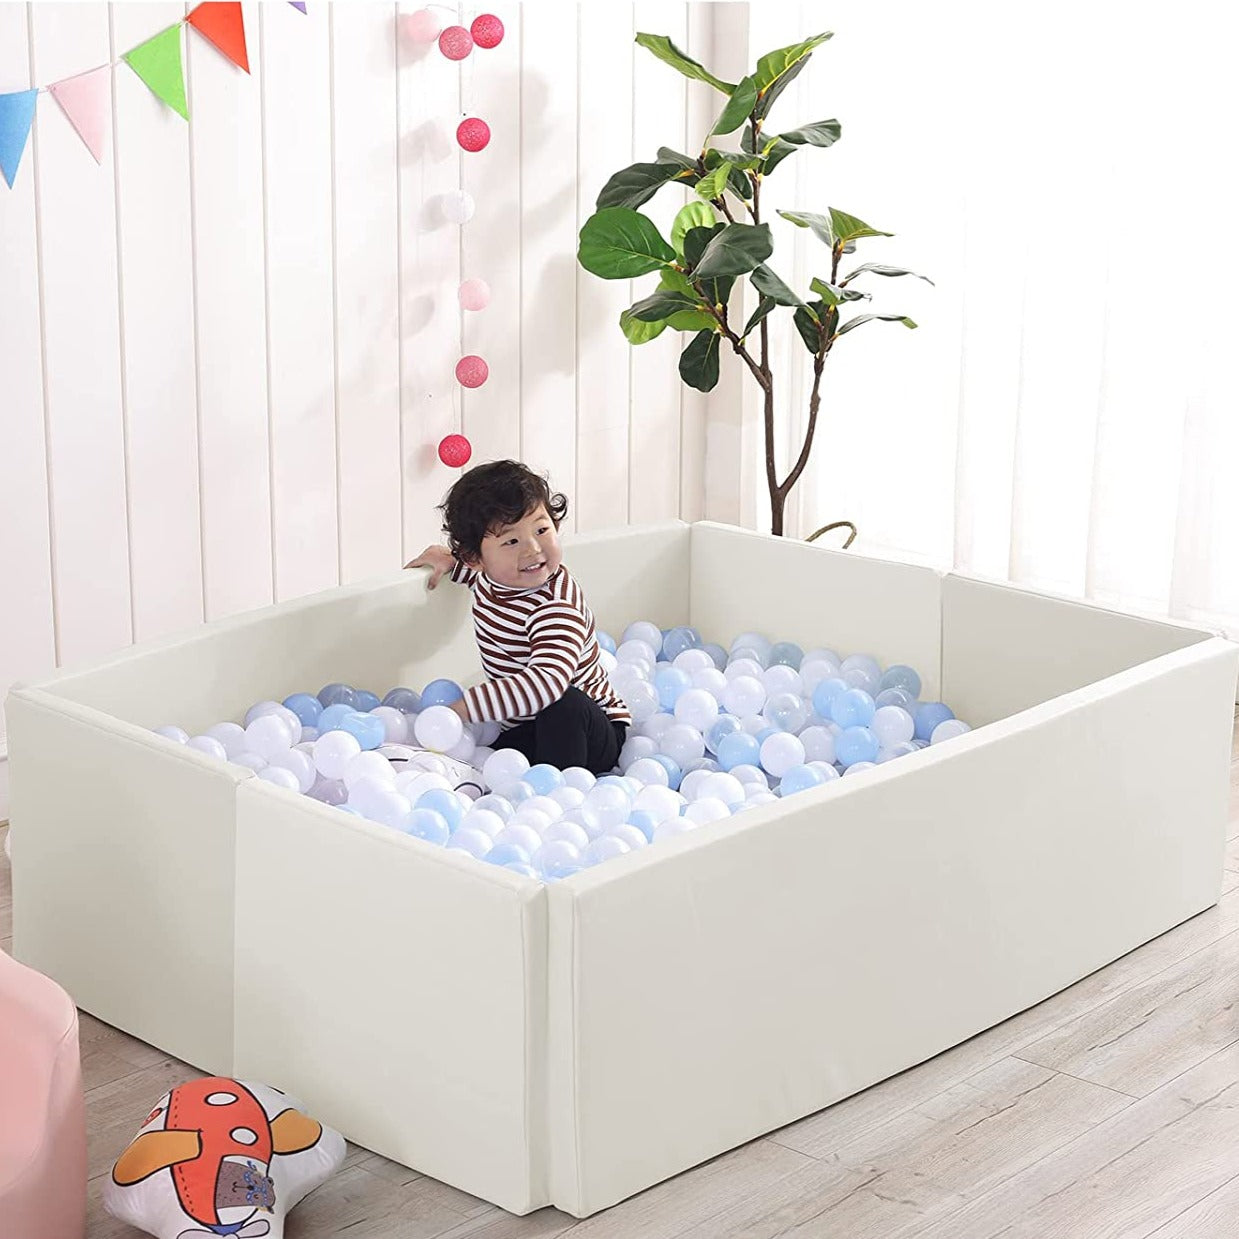 Soft Foam Foldable White Ball Pit Crawling Fence Children's Playground